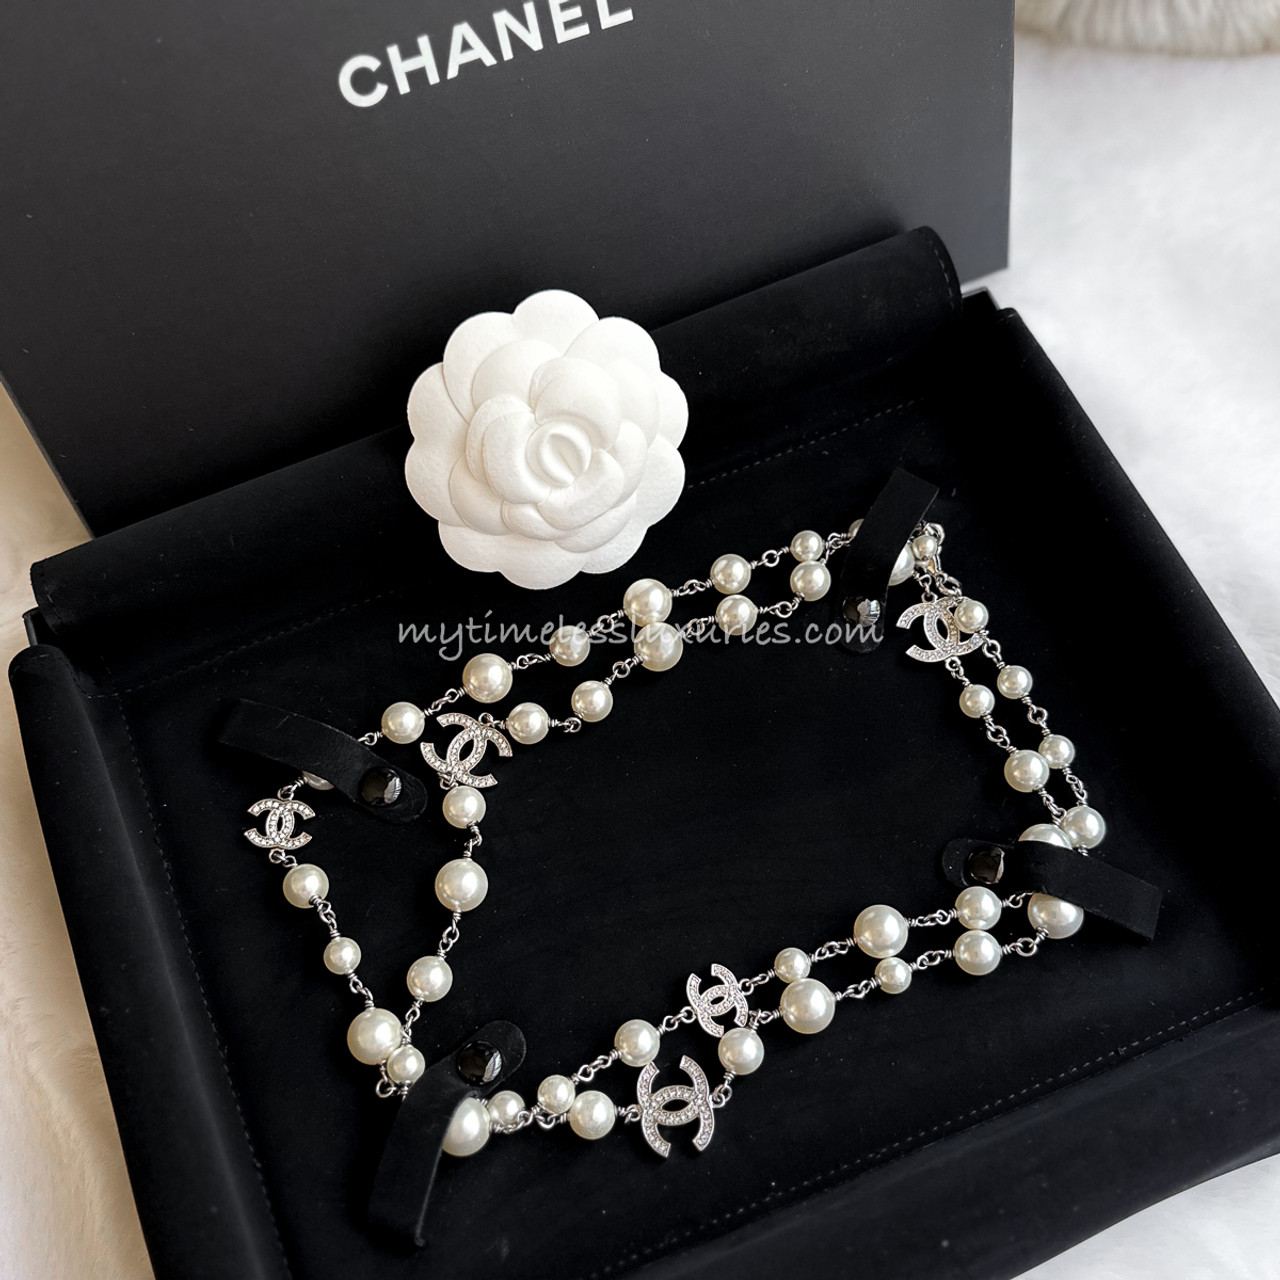 Timeless Classic Chanel Pearl 2 CC Crystal Necklace